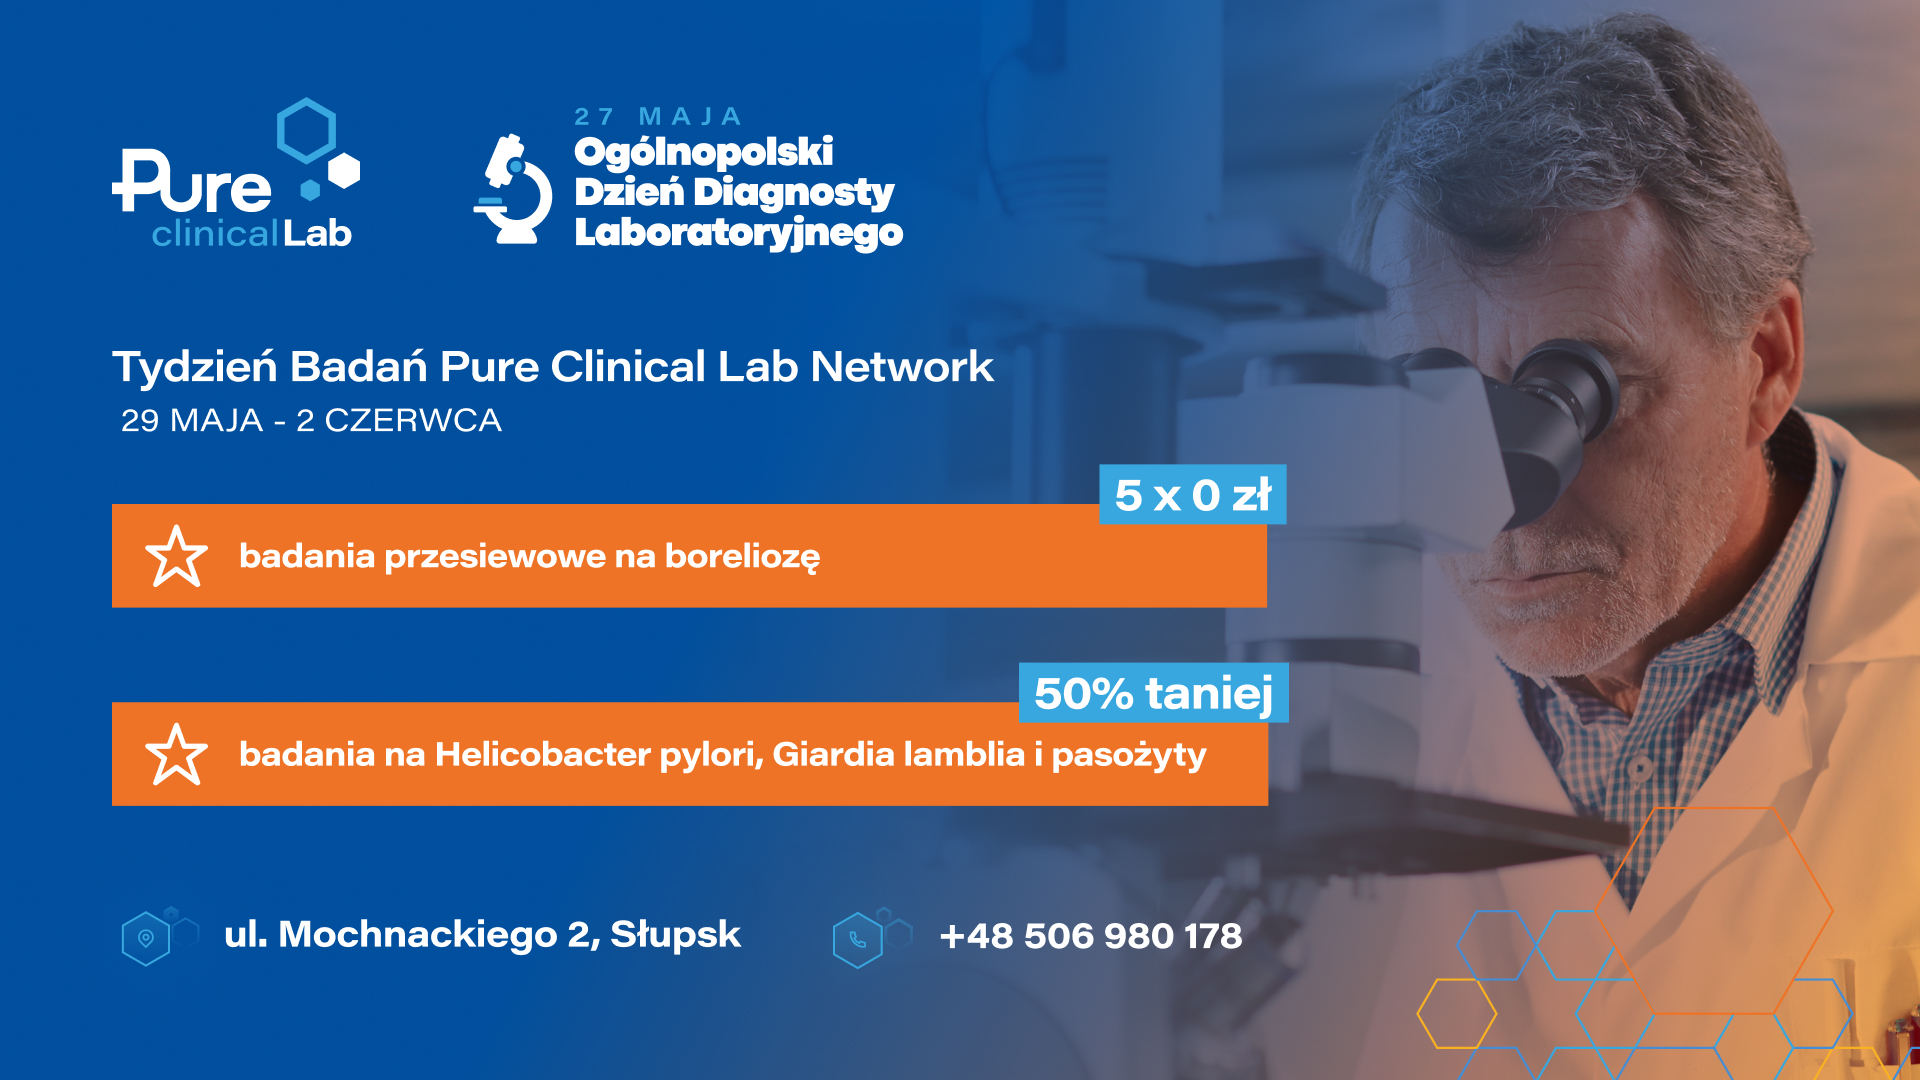 Pure Clinical Lab Network